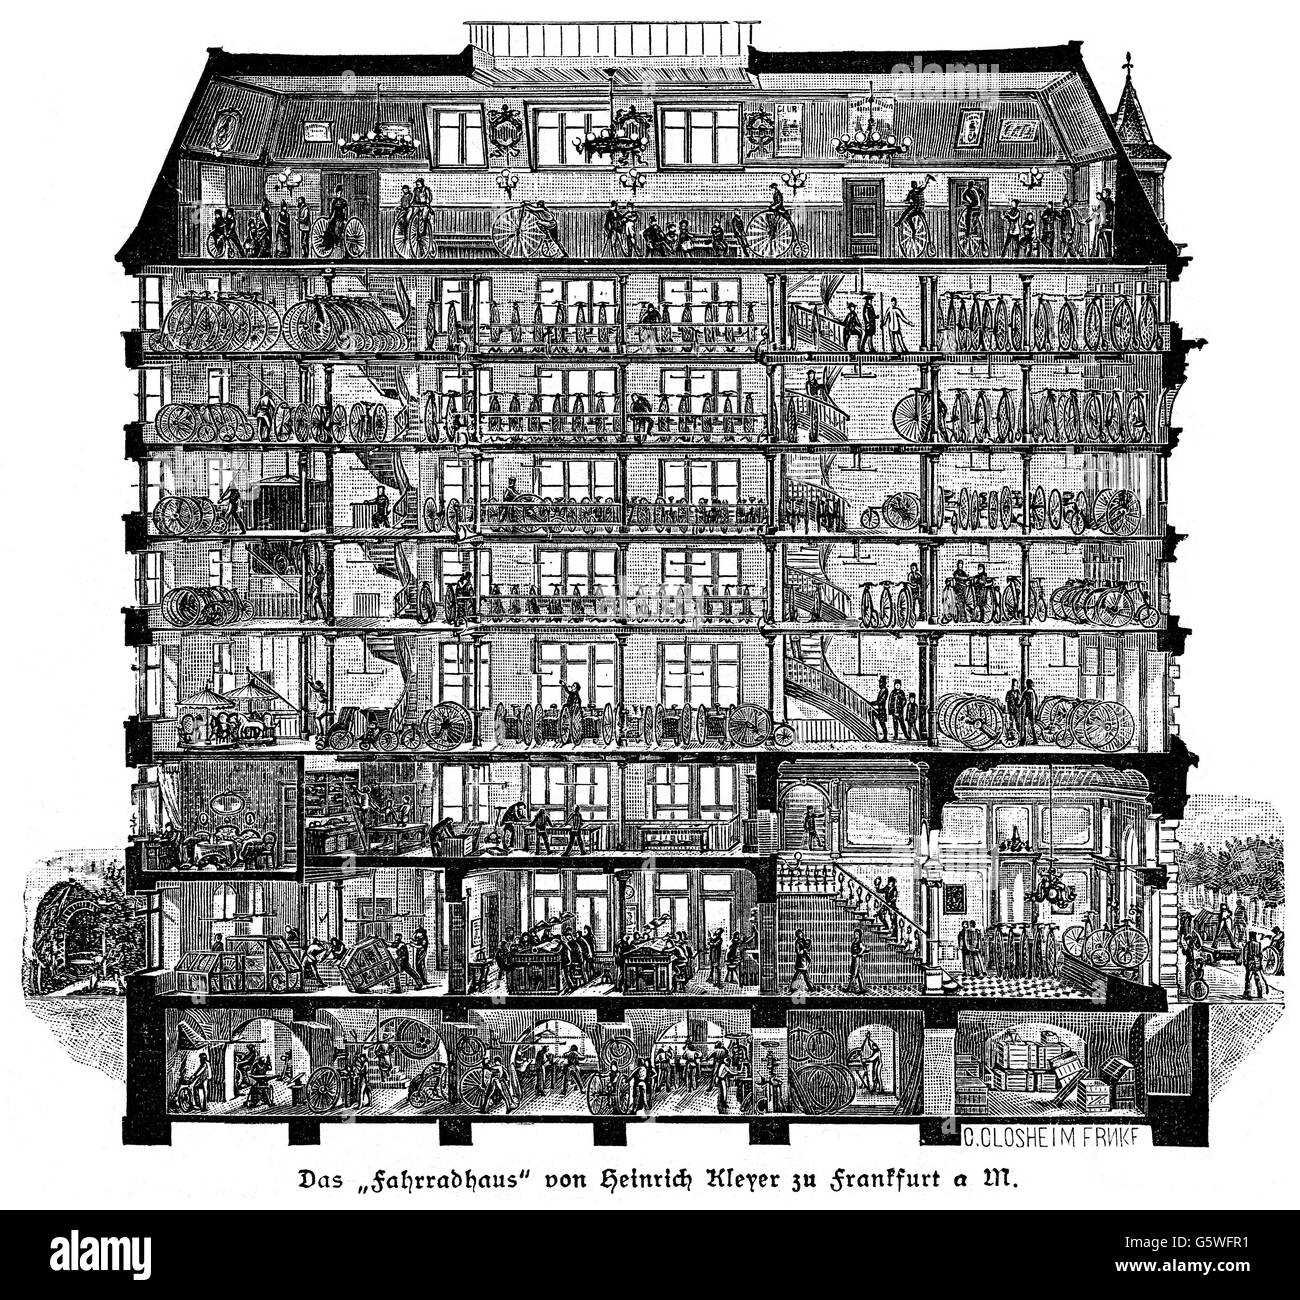 industry, factory, 'Fahrradhaus' (bicycle house) of Heinrich Kleyer, Frankfurt on the Main, wood engraving, by C.Closheim, late 19th century, Additional-Rights-Clearences-Not Available Stock Photo